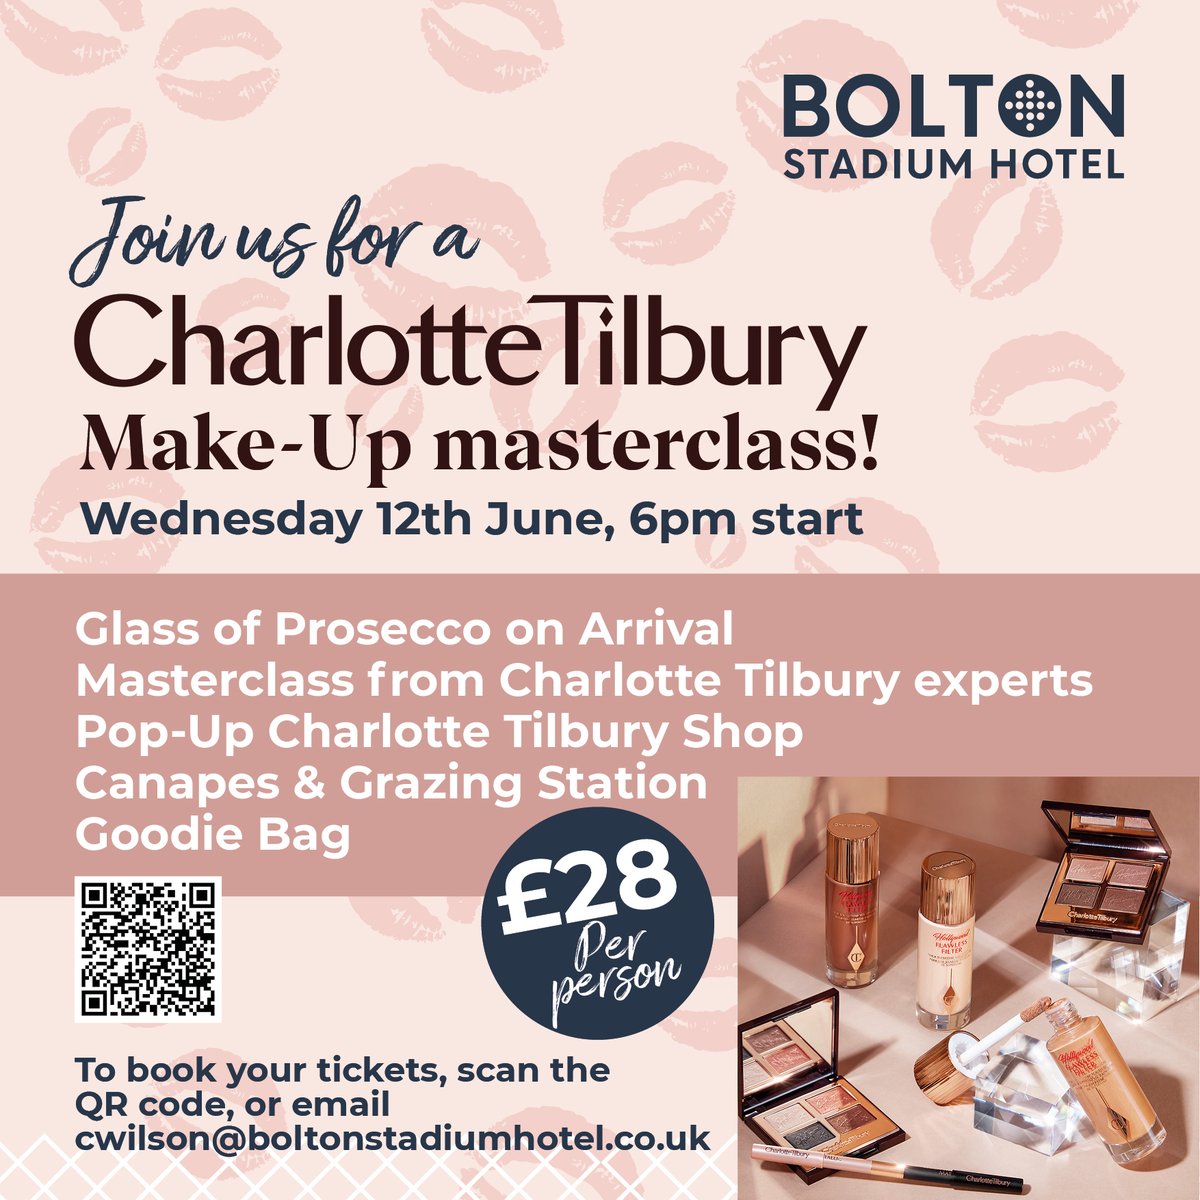 💄💋Join us for an evening of glamour! A live make up masterclass from Charlotte Tilbury experts ... To book ... 📞Call - 01204 673610 💻Email - events@boltonstadiumhotel.co.uk Or book on line ... eventbrite.co.uk/o/bolton-stadi…